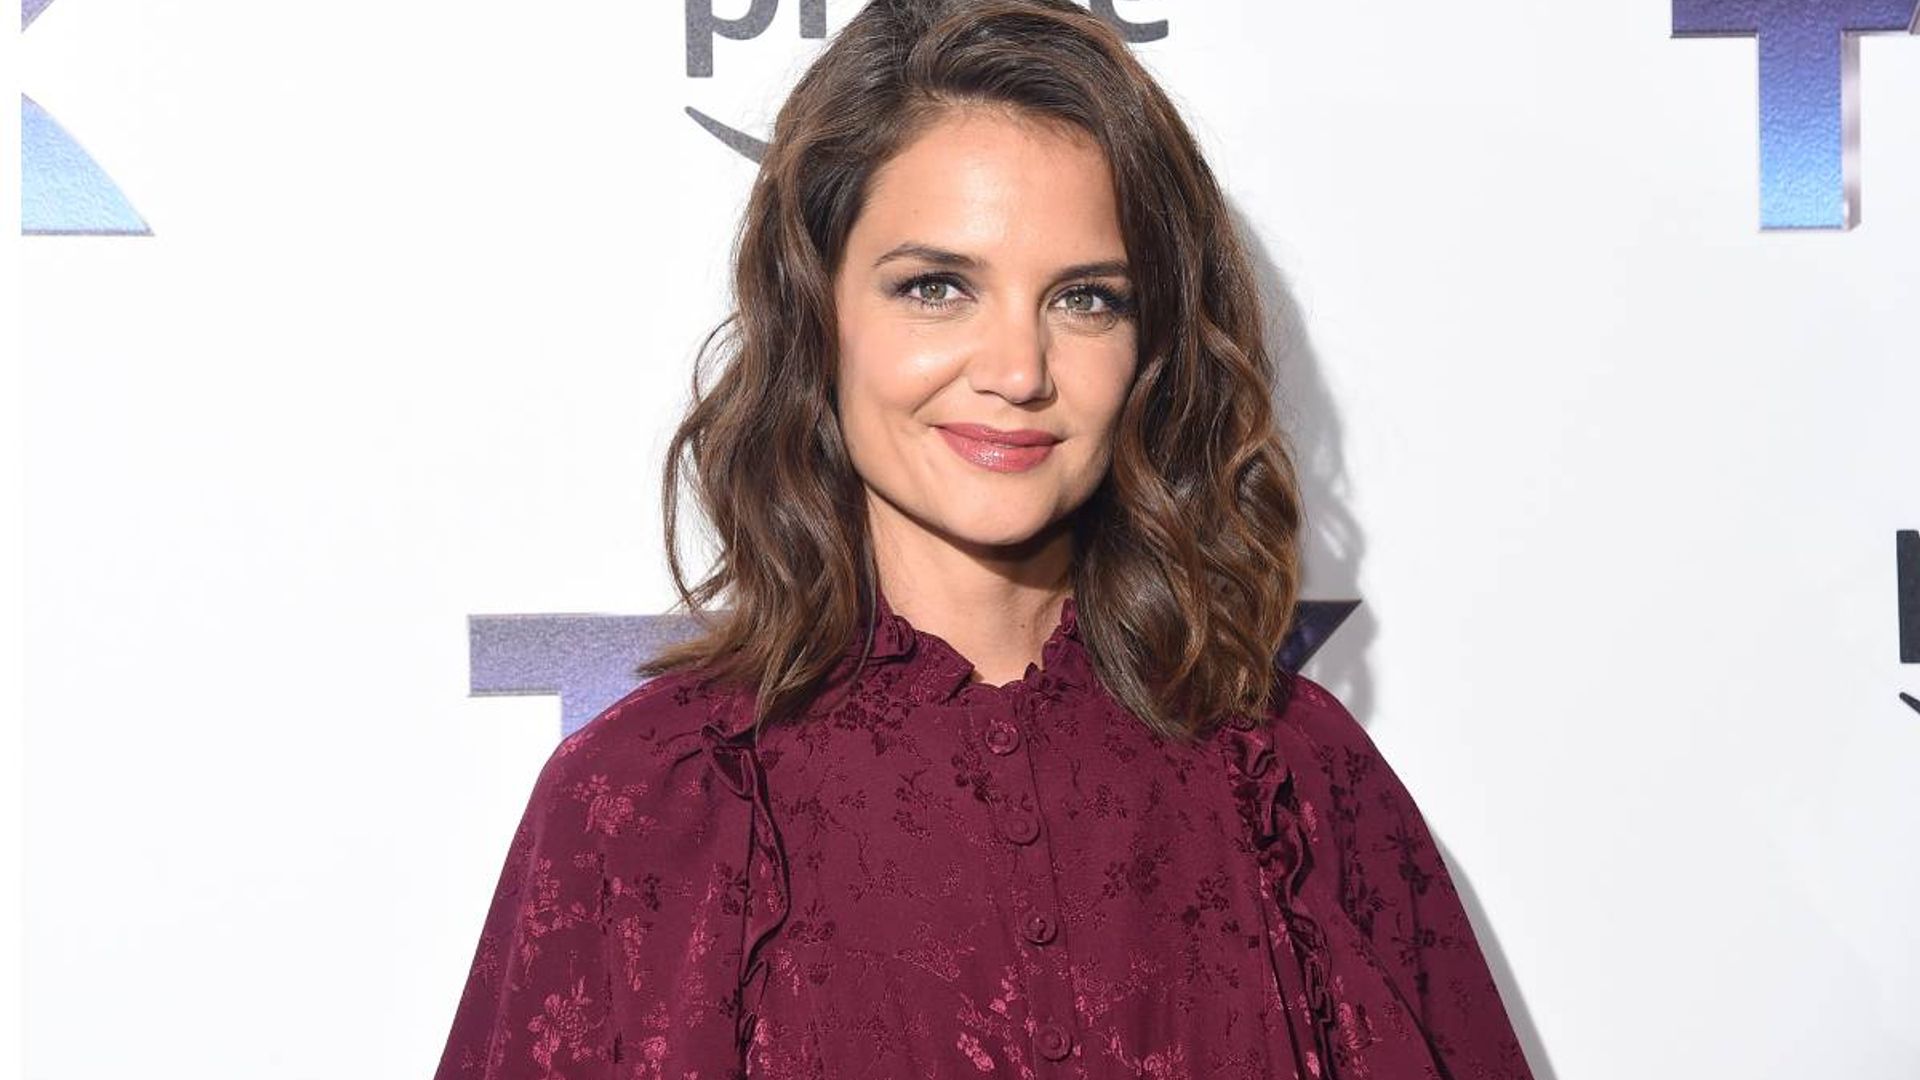 Katie Holmes' Go-To Big Bag Trend Is a Must-Try